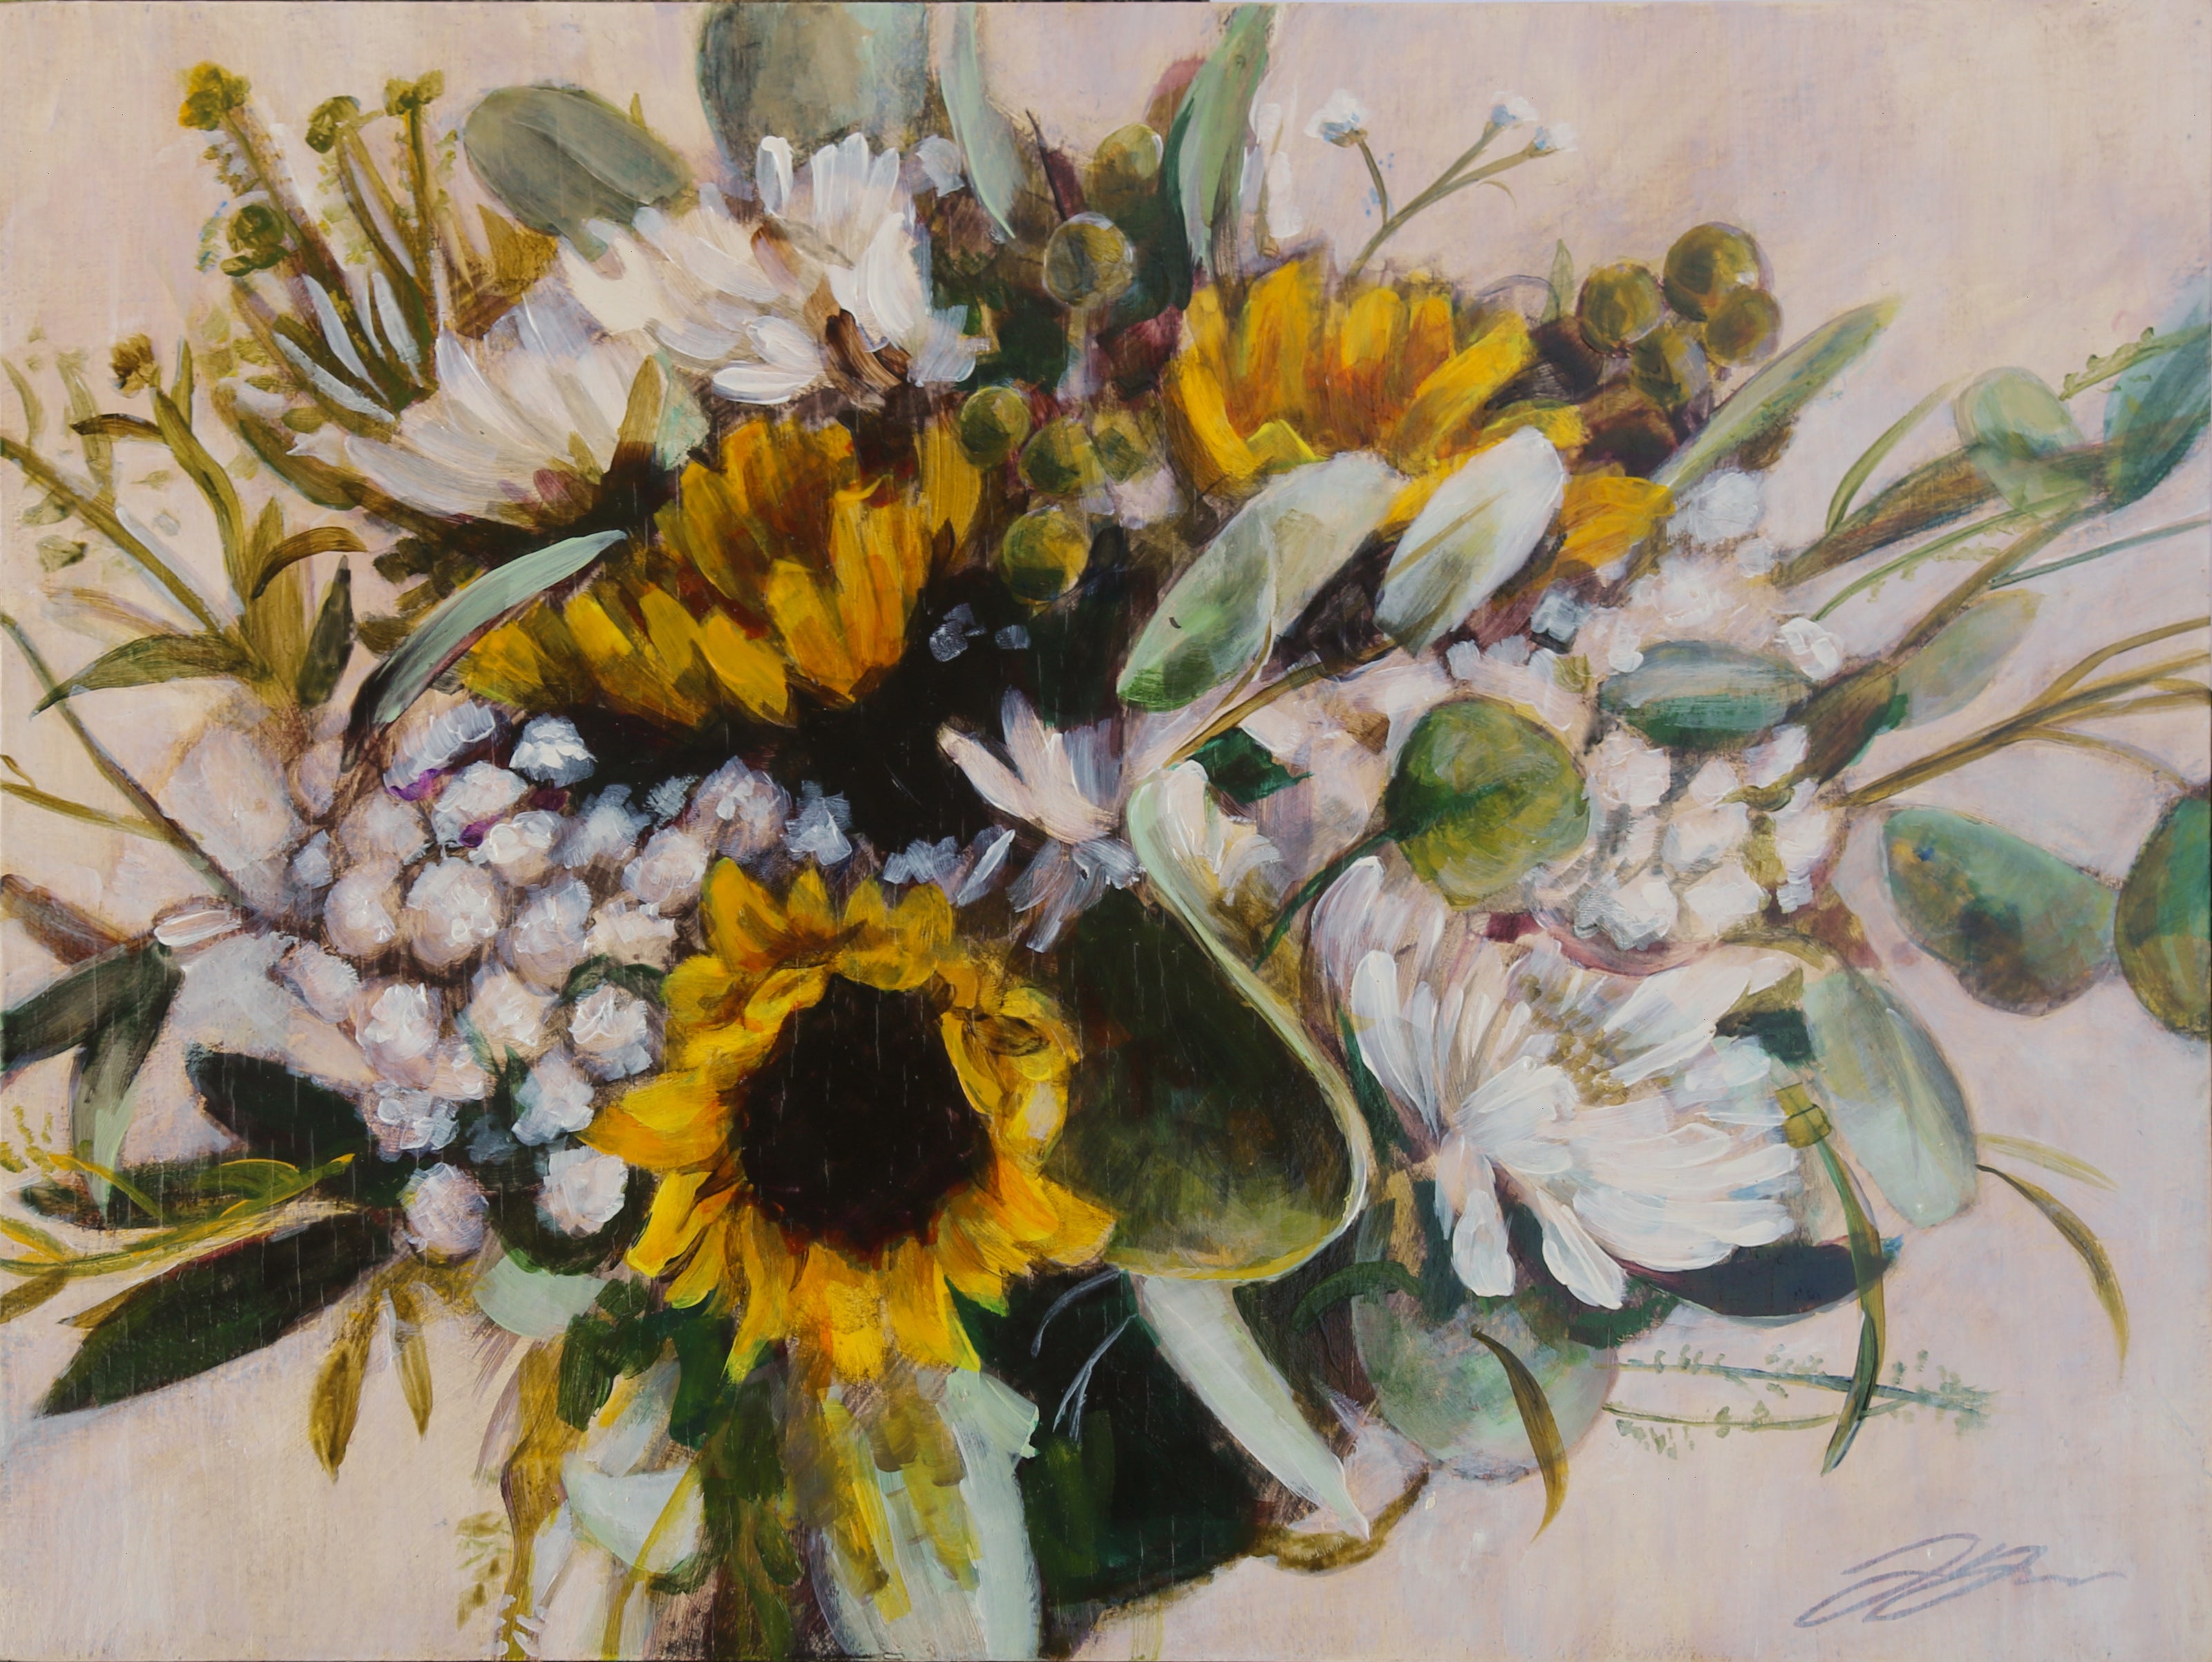 Acrylic and gouache painting "Sunflower Bouquet" by artist Jackie Hanson. A realistically painted bouquet of green leaves, white flowers and most prominently sunflowers over a cream background.